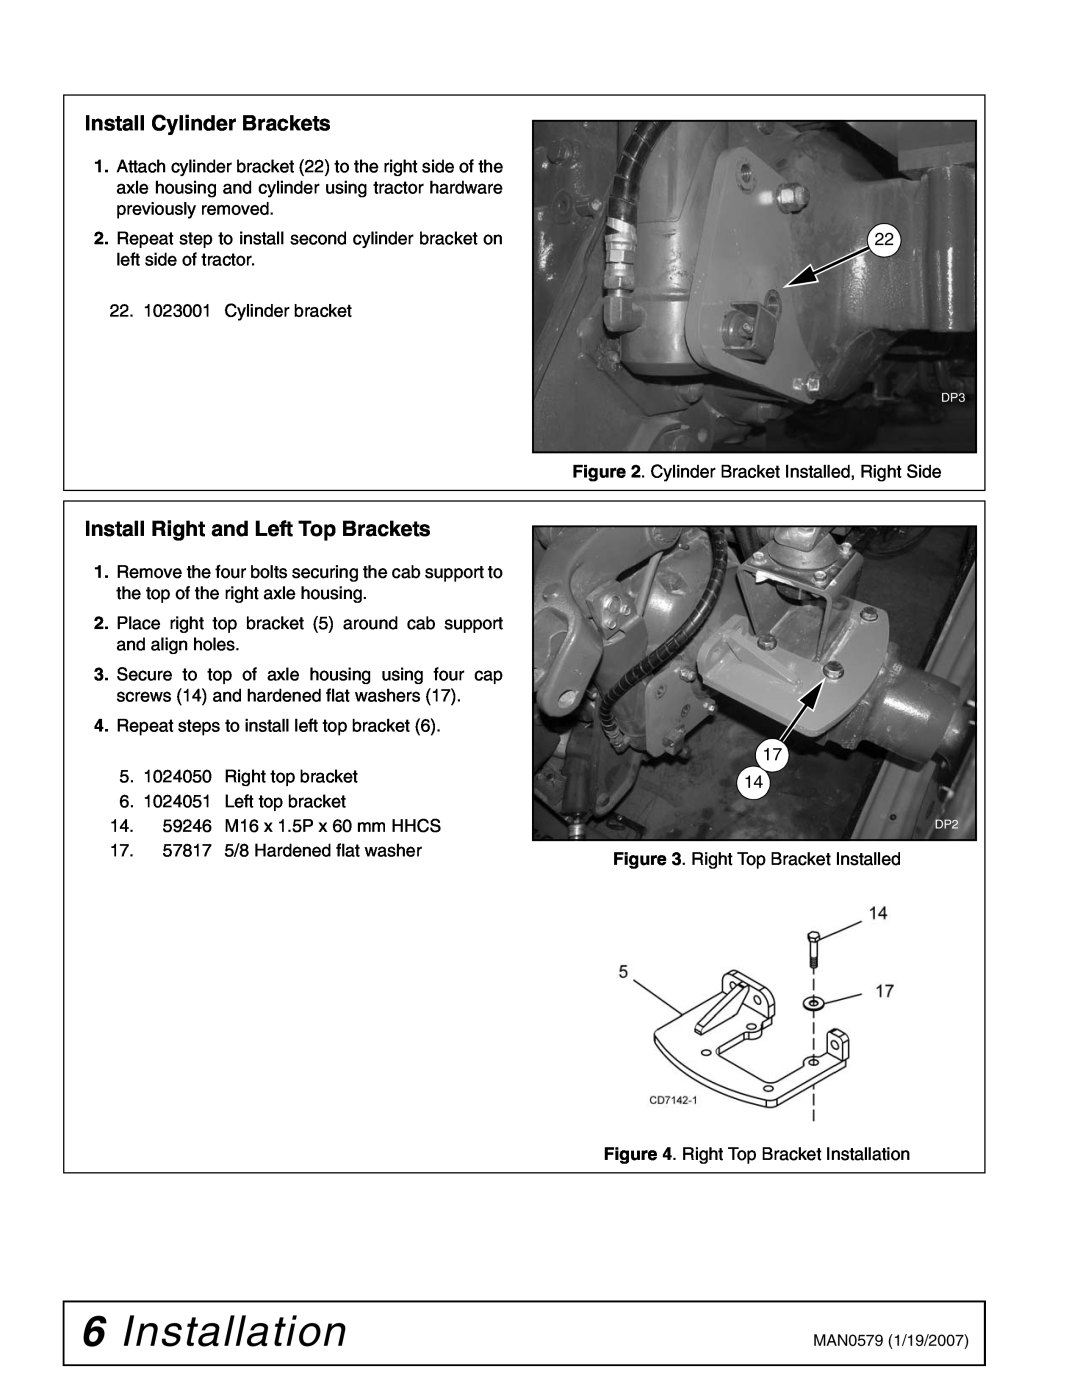 Woods Equipment 1023000 installation manual Installation, Install Cylinder Brackets, Install Right and Left Top Brackets 